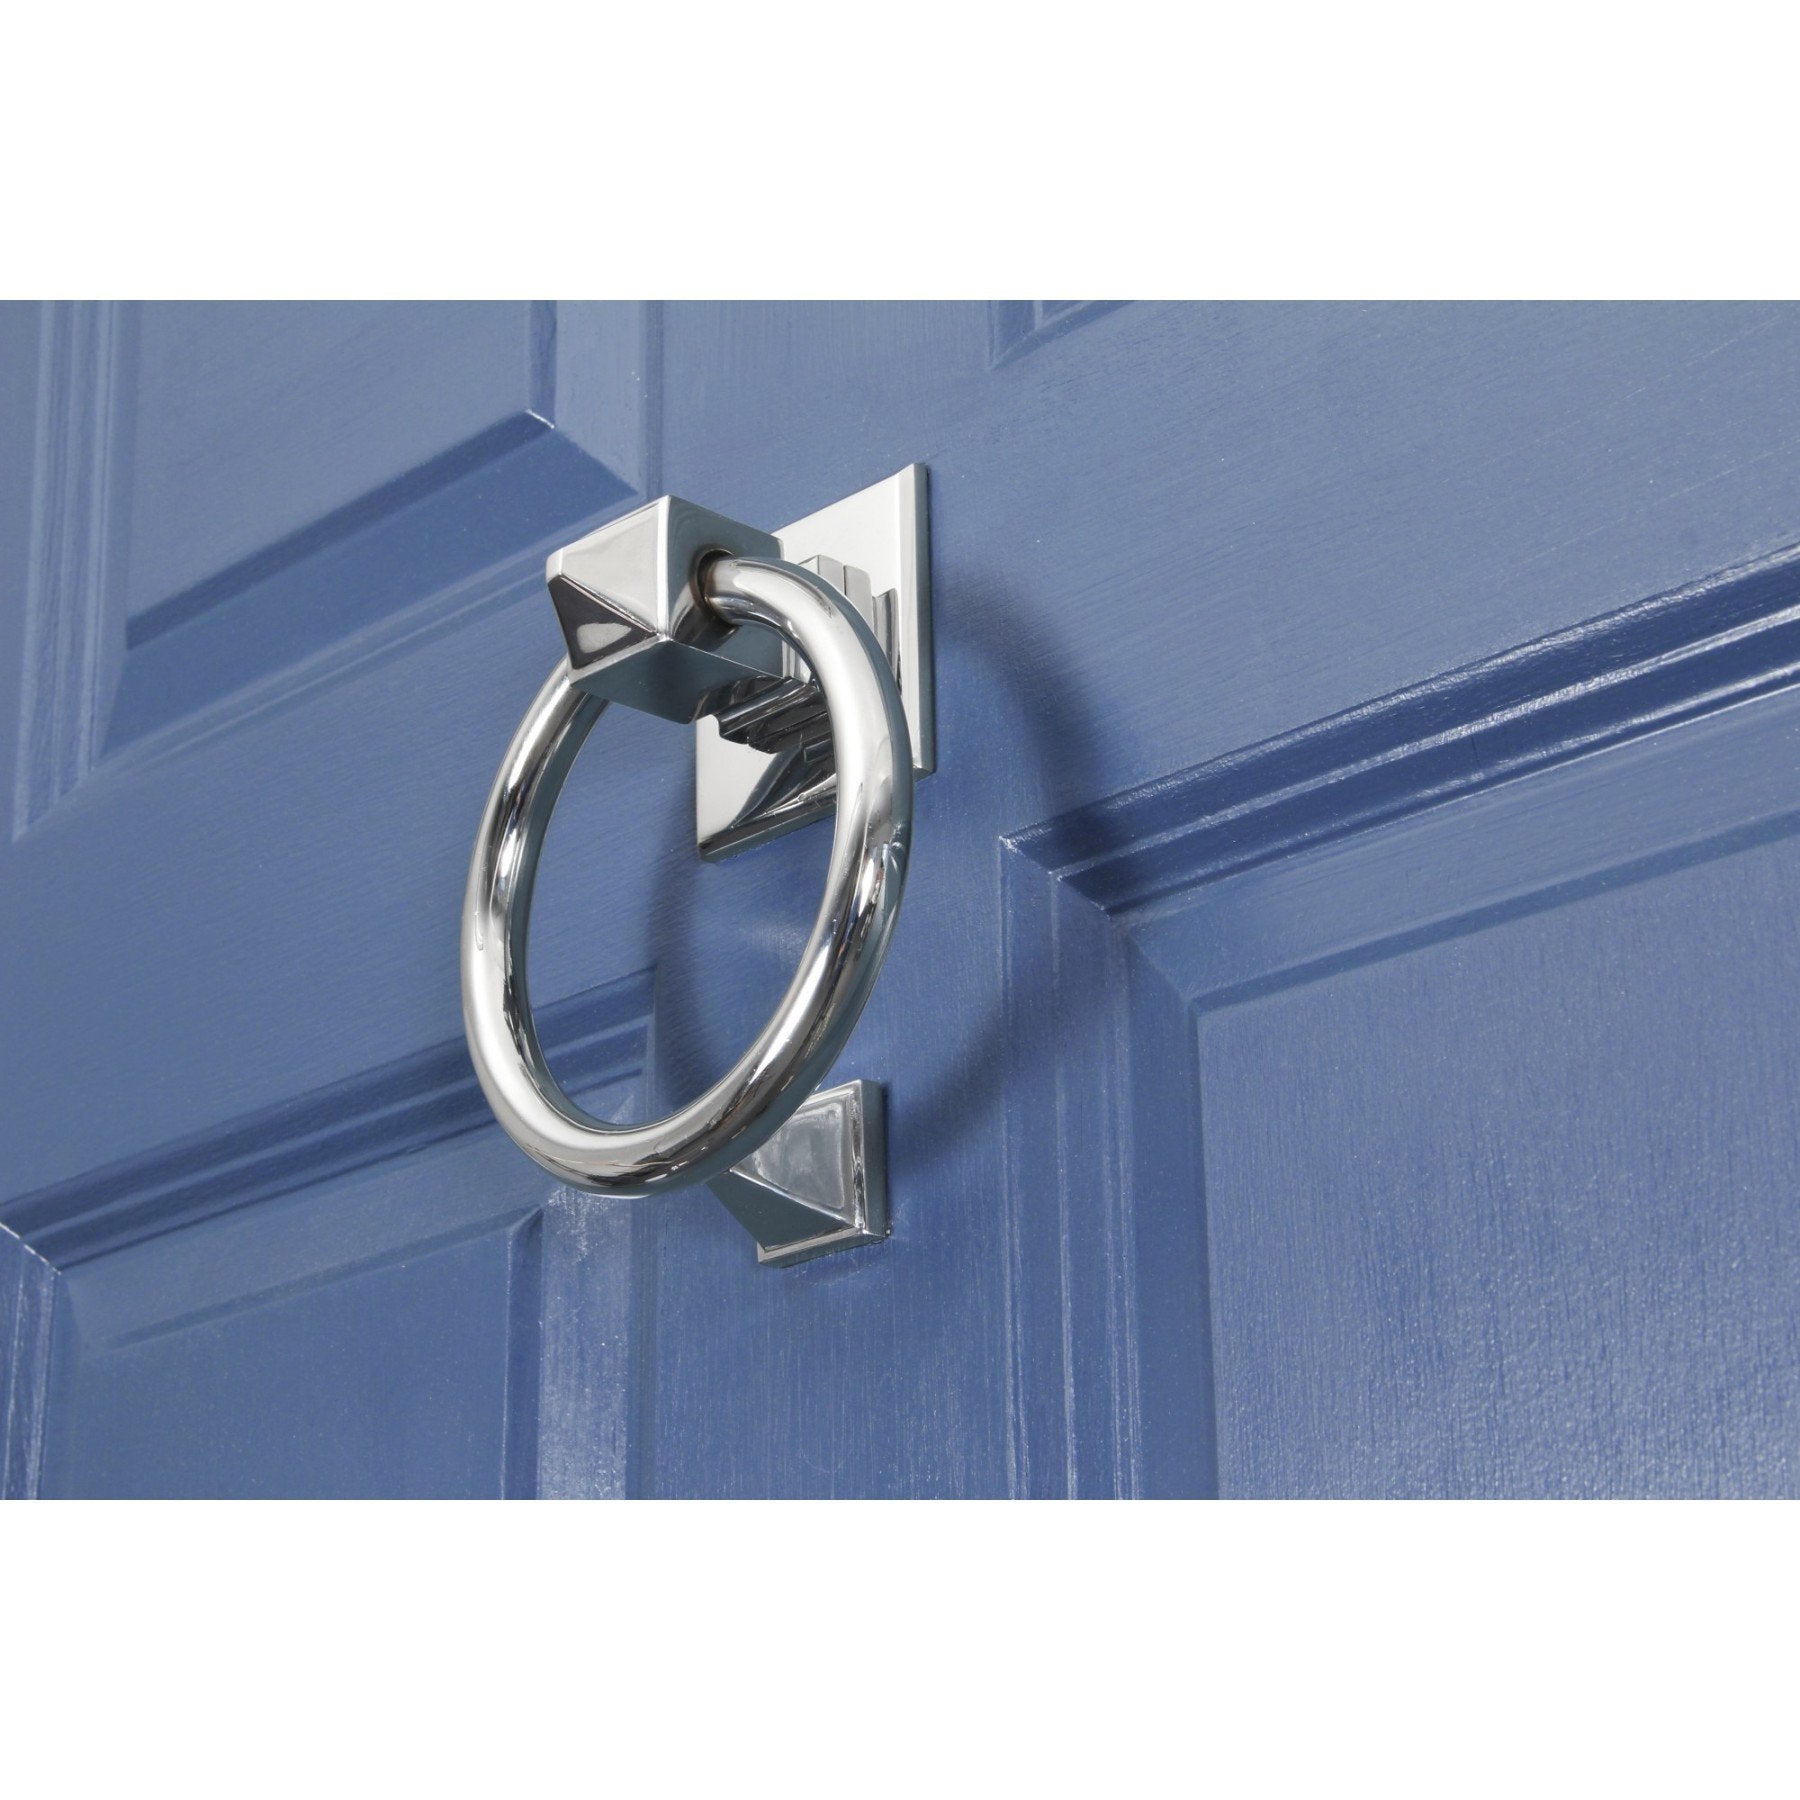 From the Anvil Polished Chrome Ring Door Knocker